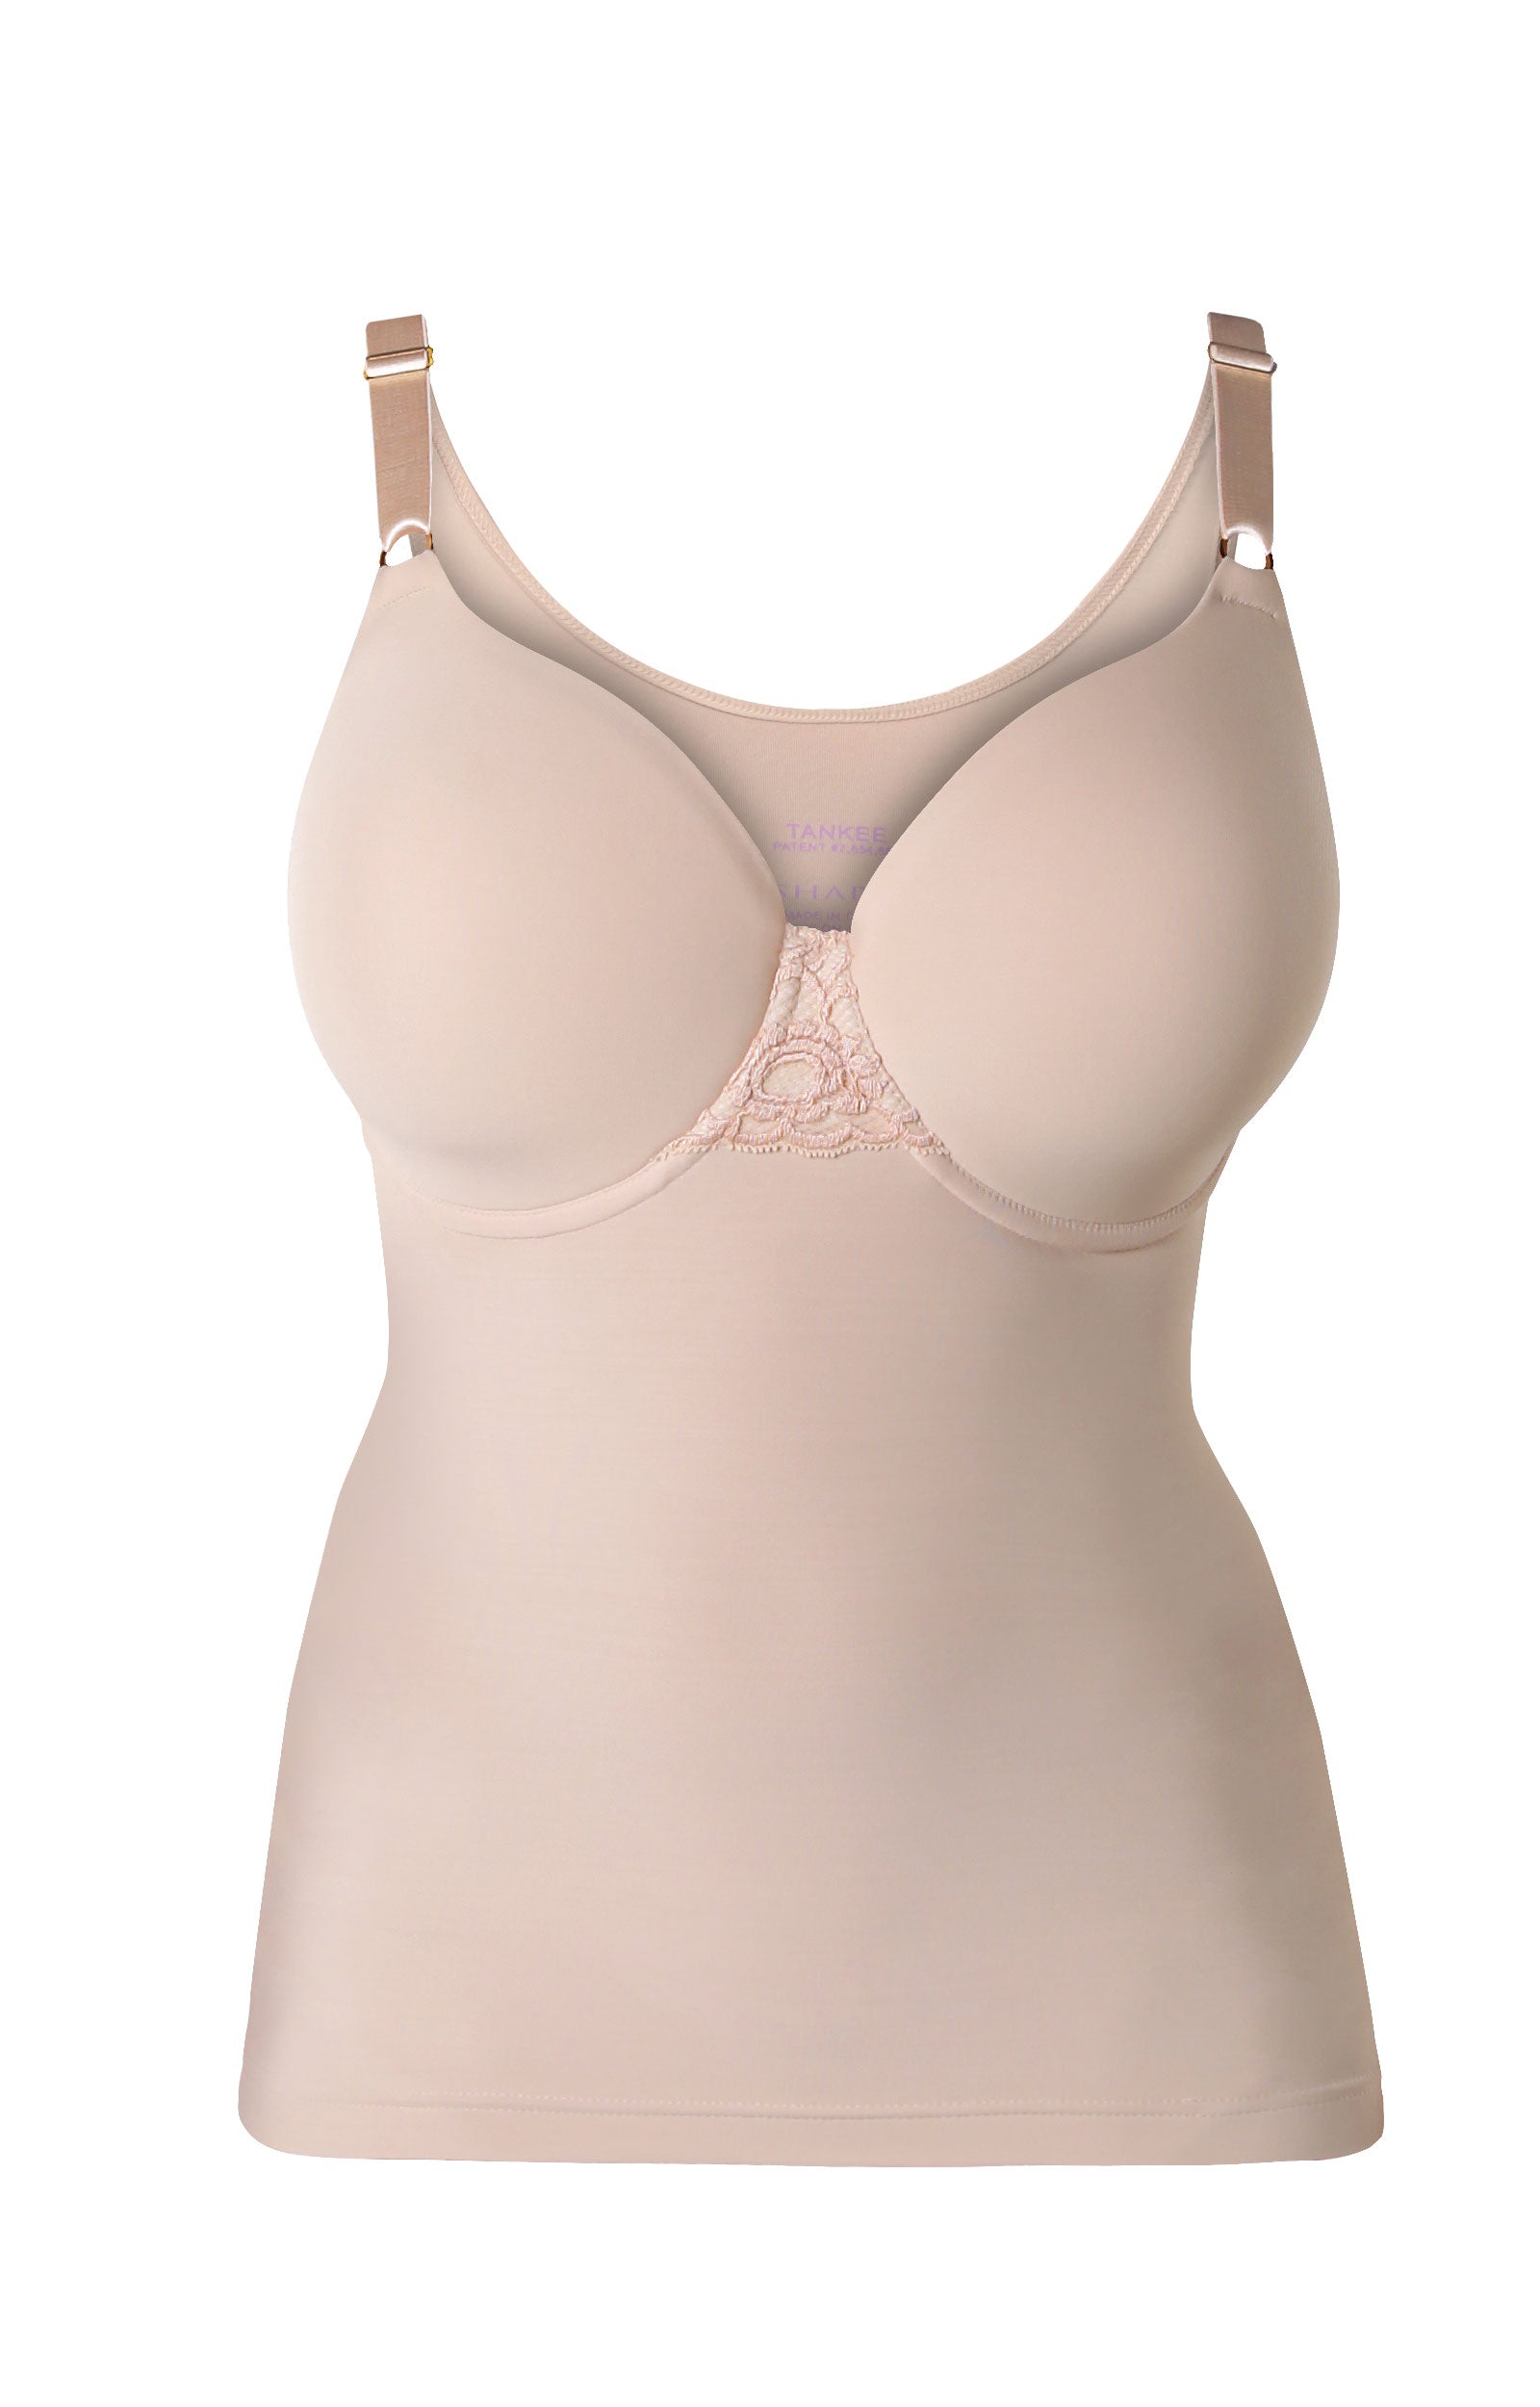 The Tankee Long is a longline bra, camisole and torso trimmer in